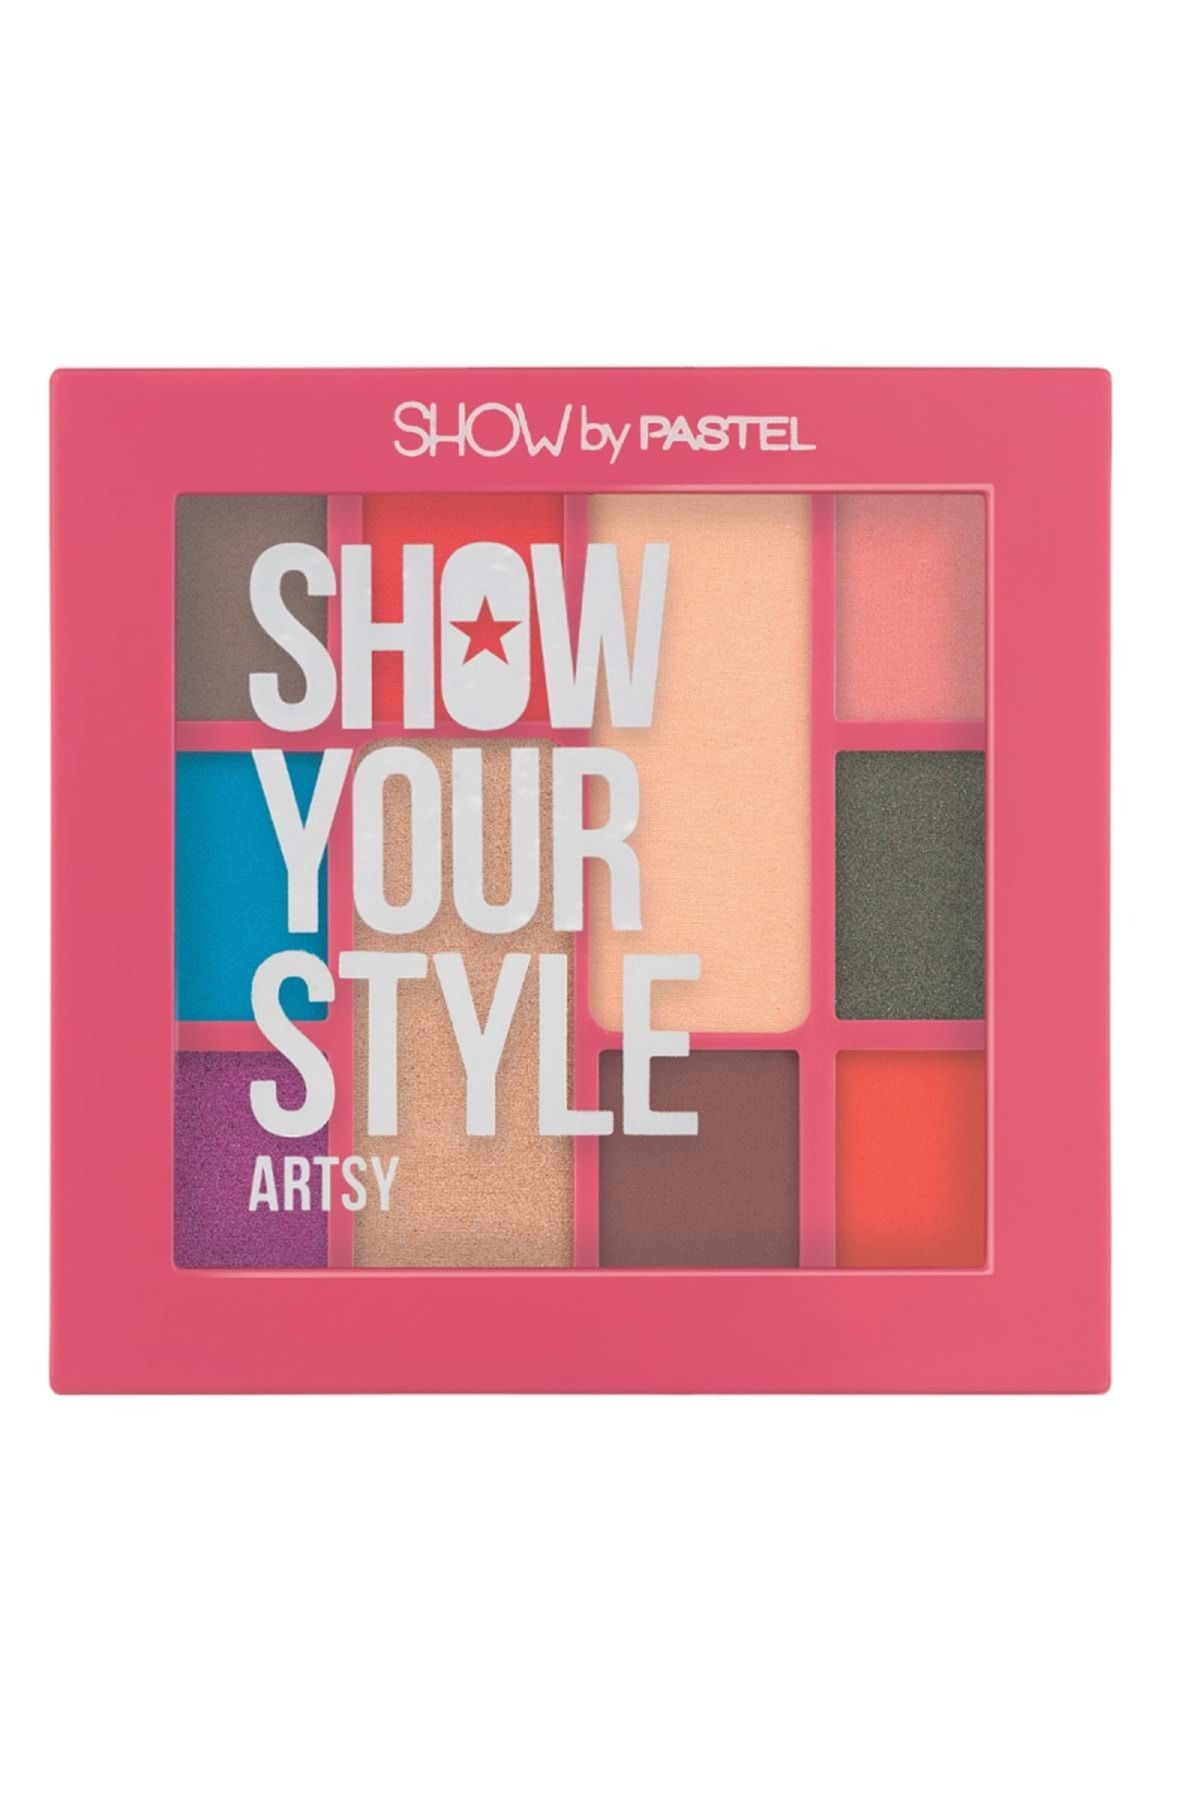 Show by Pastel Show Your Style Far Artsy - Pembe